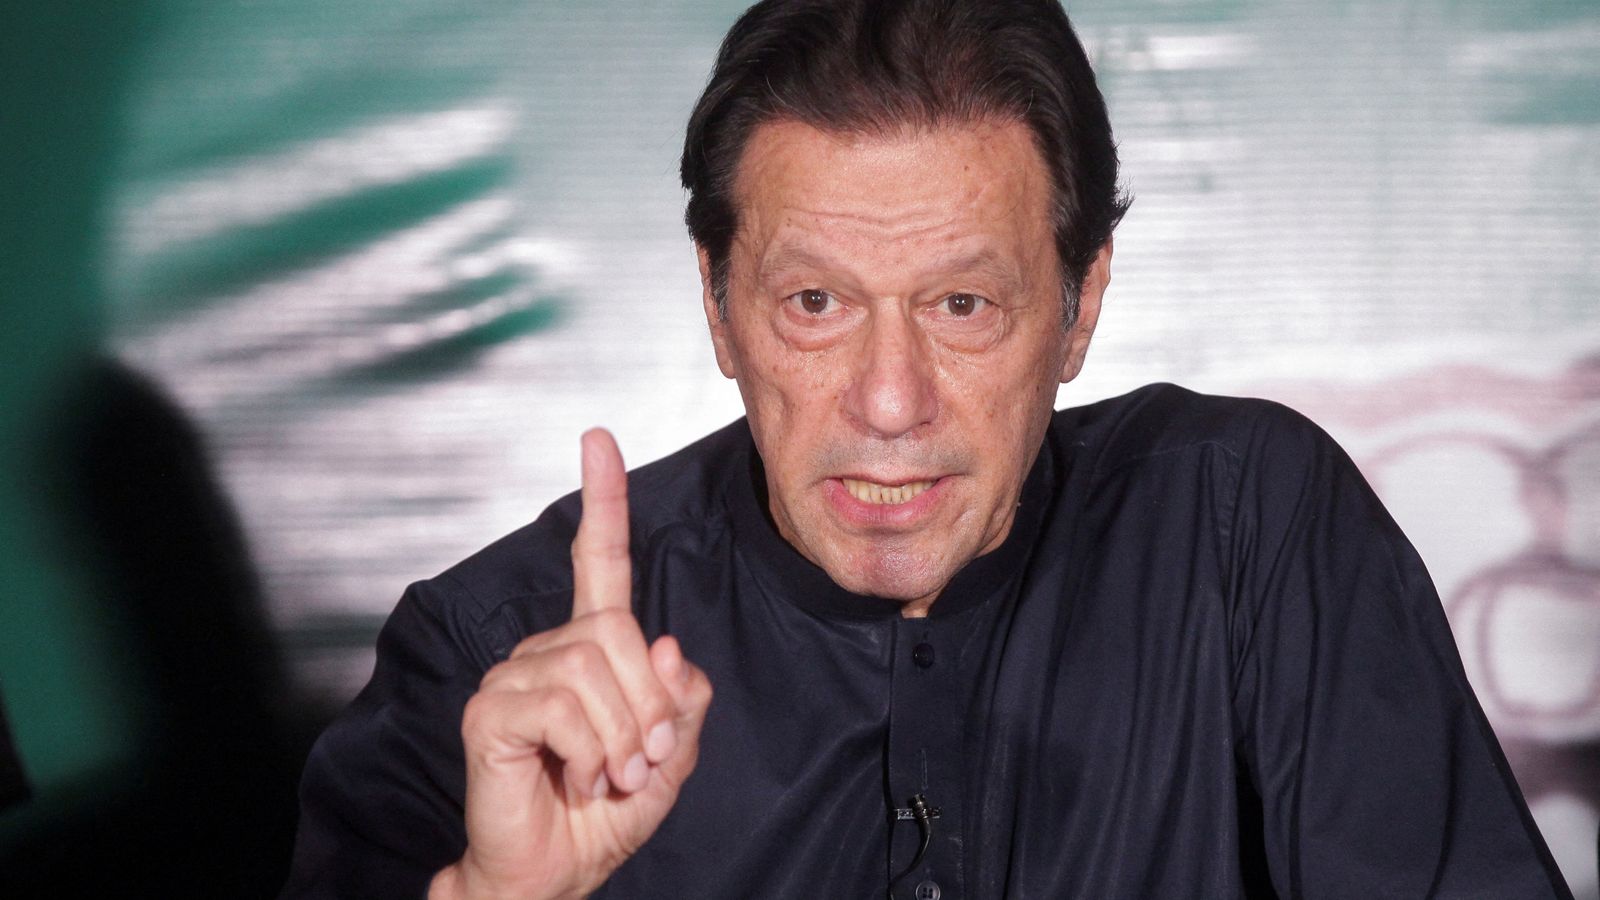 Imran Khan: Pakistan's former prime minister sentenced to 10 years in prison for leaking state secrets